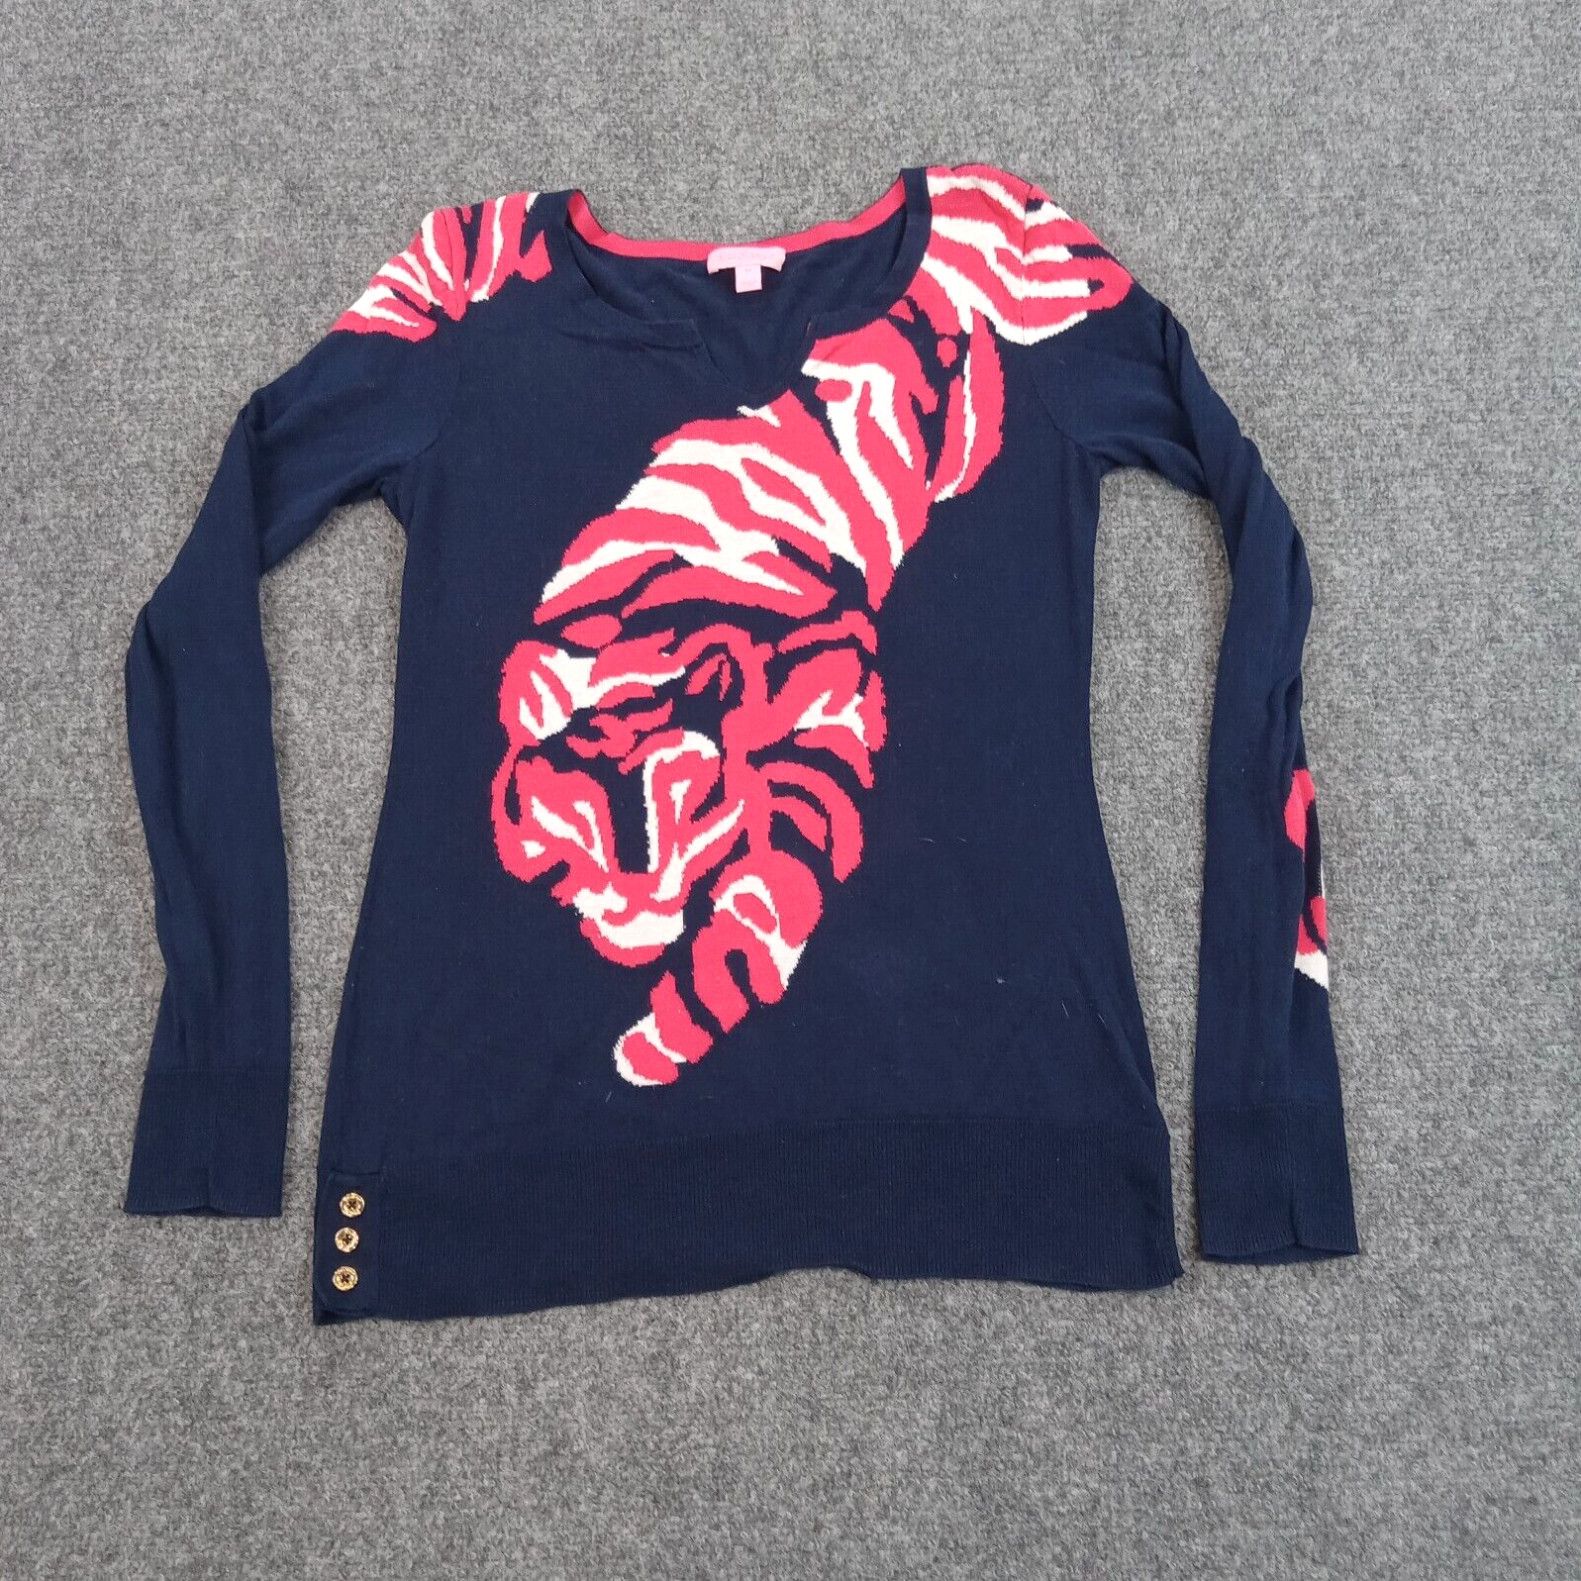 Lilly Pulitzer Lilly Pulitzer Top Womens Medium Blue Pink Tiger V-Neck Long Sleeve Buttons Size M / US 6-8 / IT 42-44 - 1 Preview